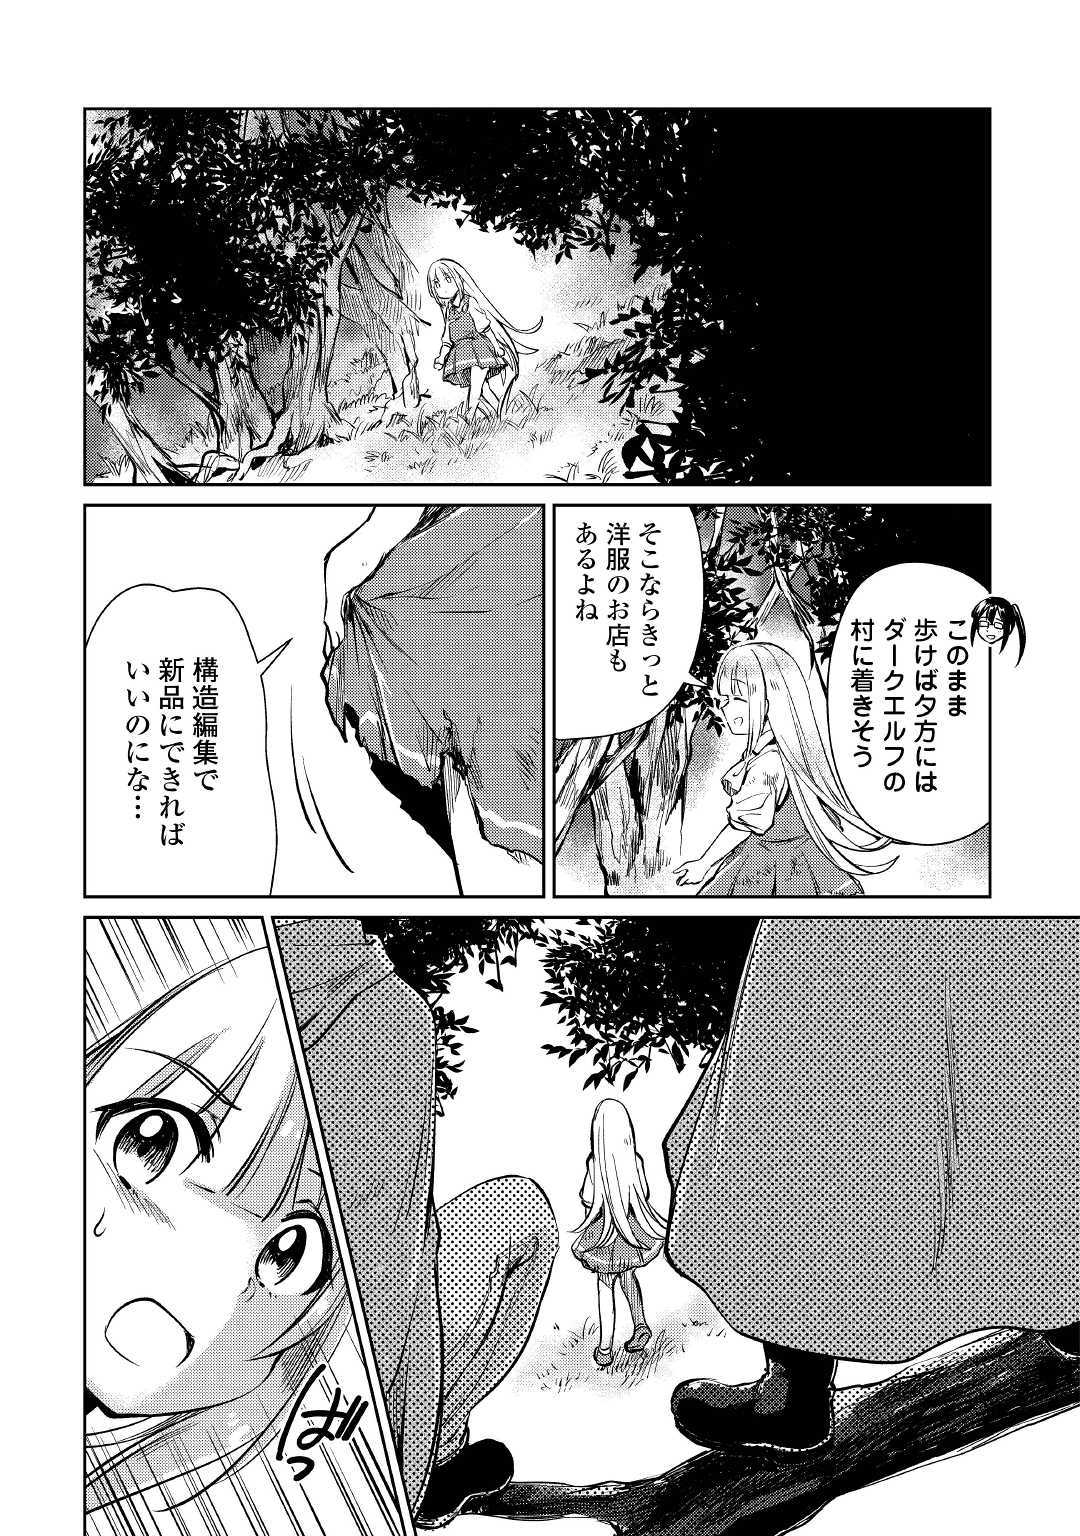 The Former Structural Researcher’s Story of Otherworldly Adventure 第18話 - Page 12